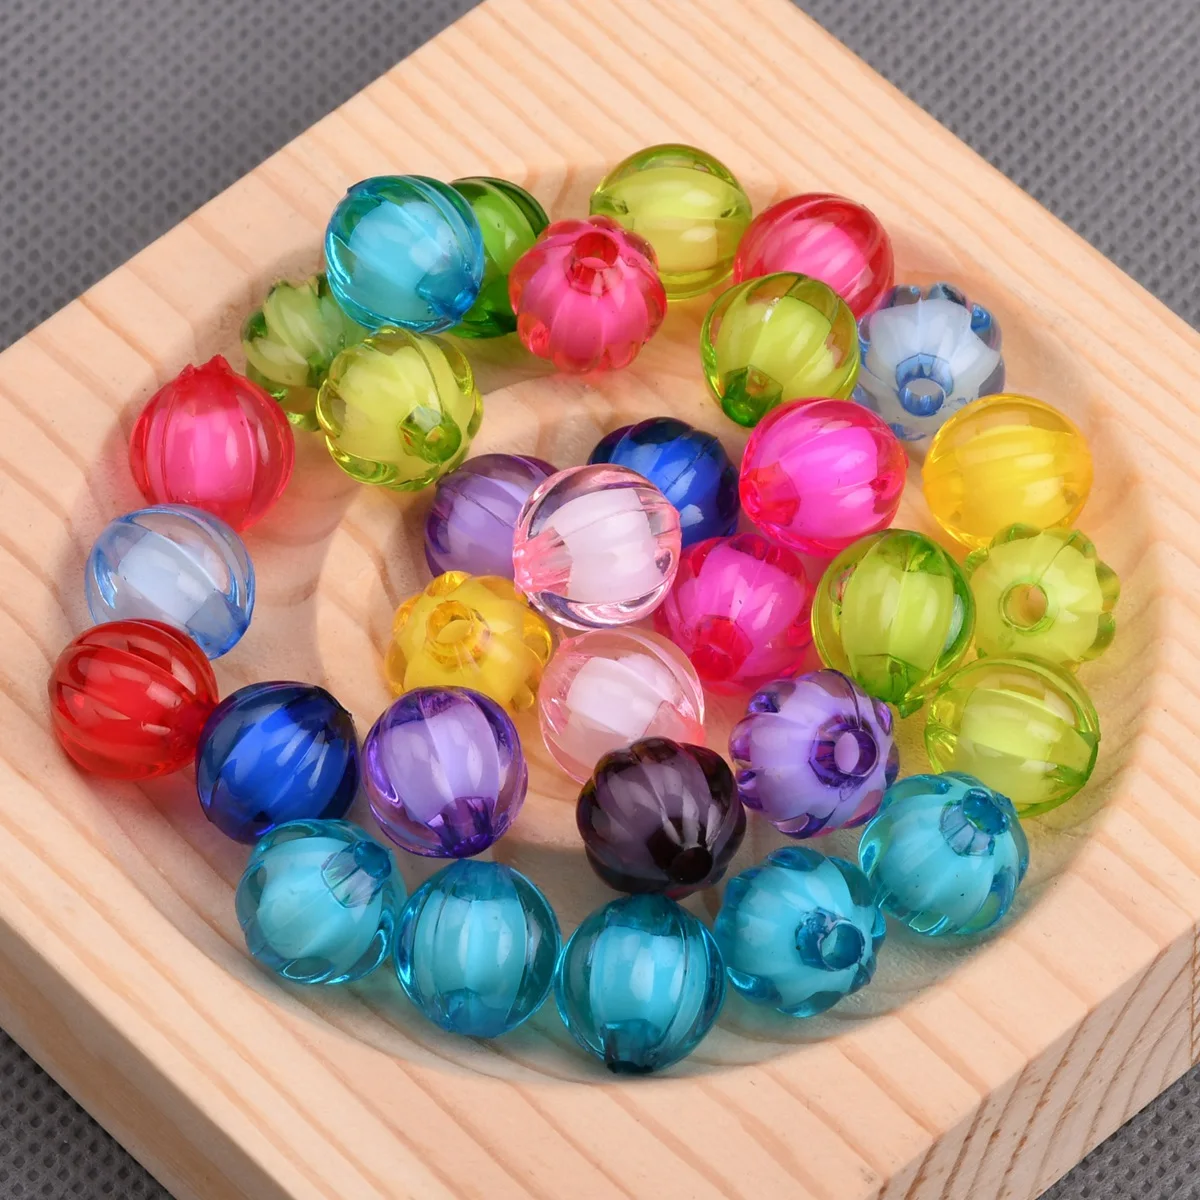 50pcs Round Pumpkin Shape 8mm 10mm 12mm Acrylic Plastic Loose Beads Wholesale Bulk Lot For Jewelry Making Findings 90 60mm l shape slant stand up supermarket price acrylic sign holder plastic small table price sign holder stand